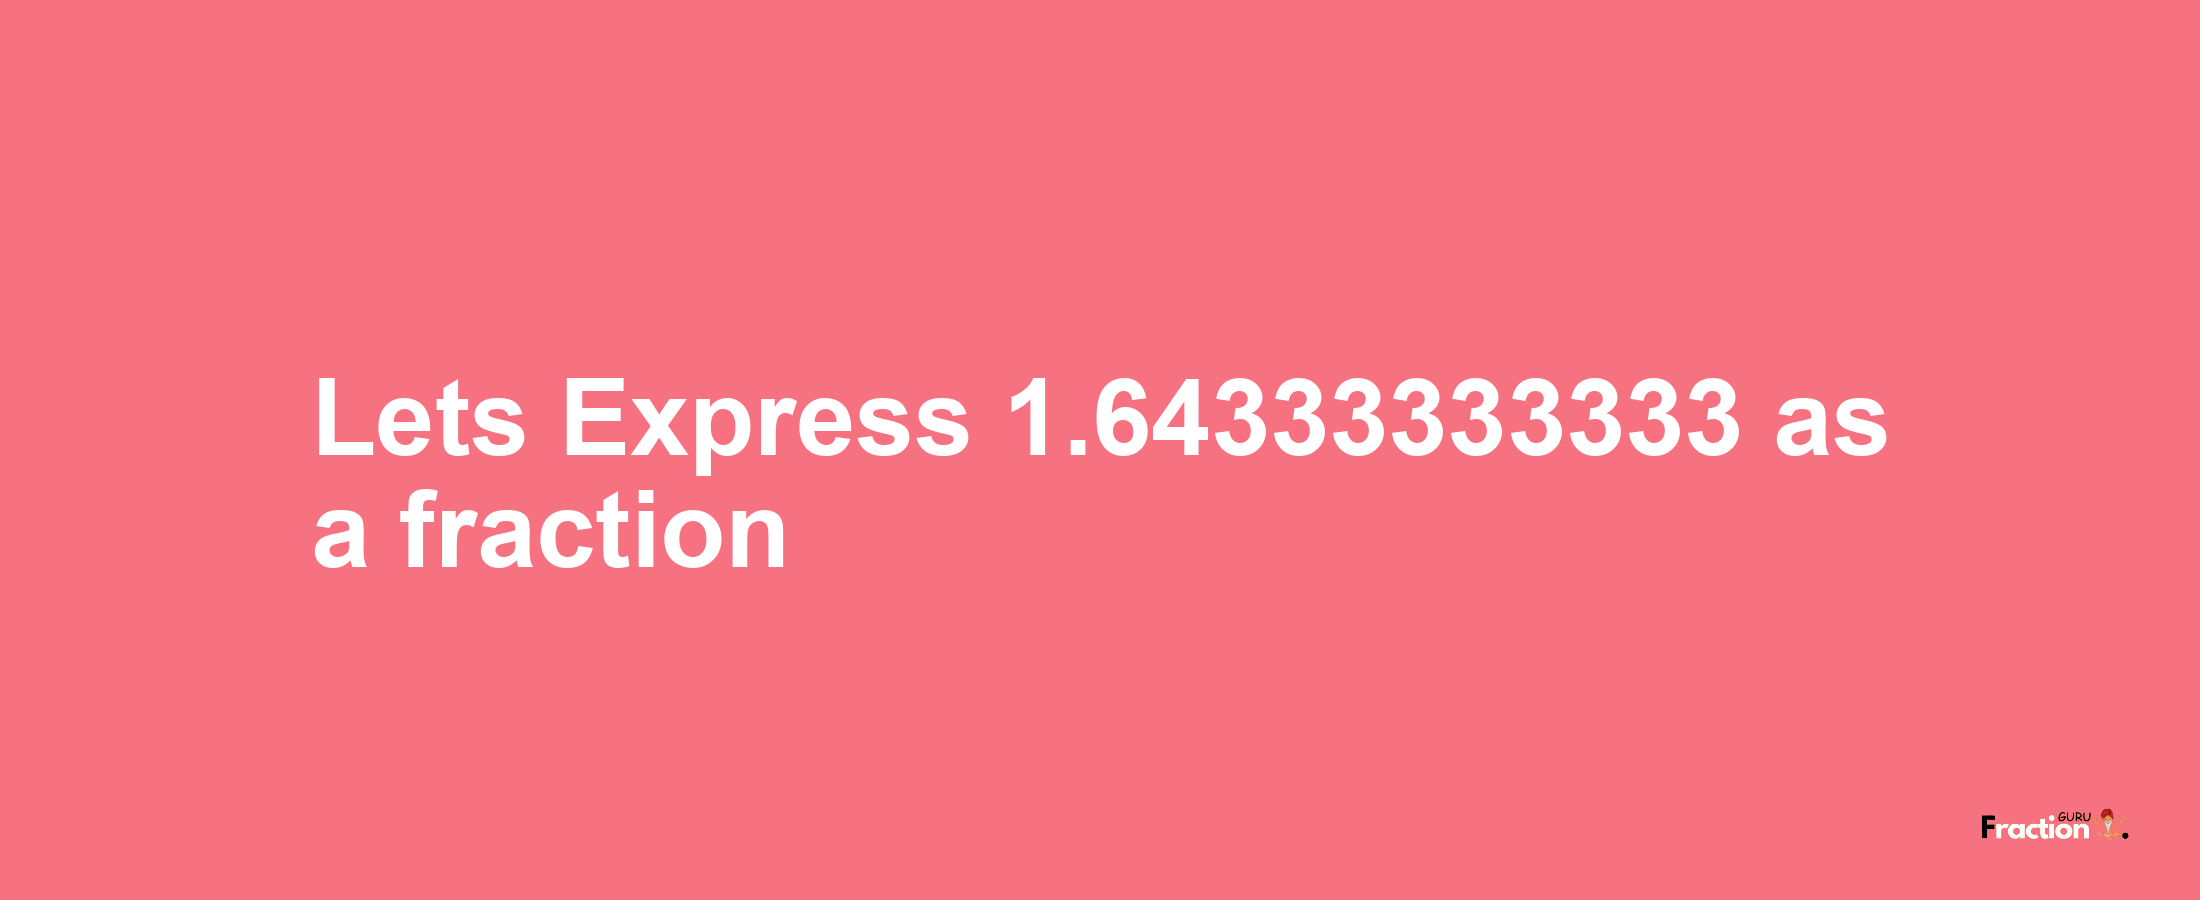 Lets Express 1.64333333333 as afraction